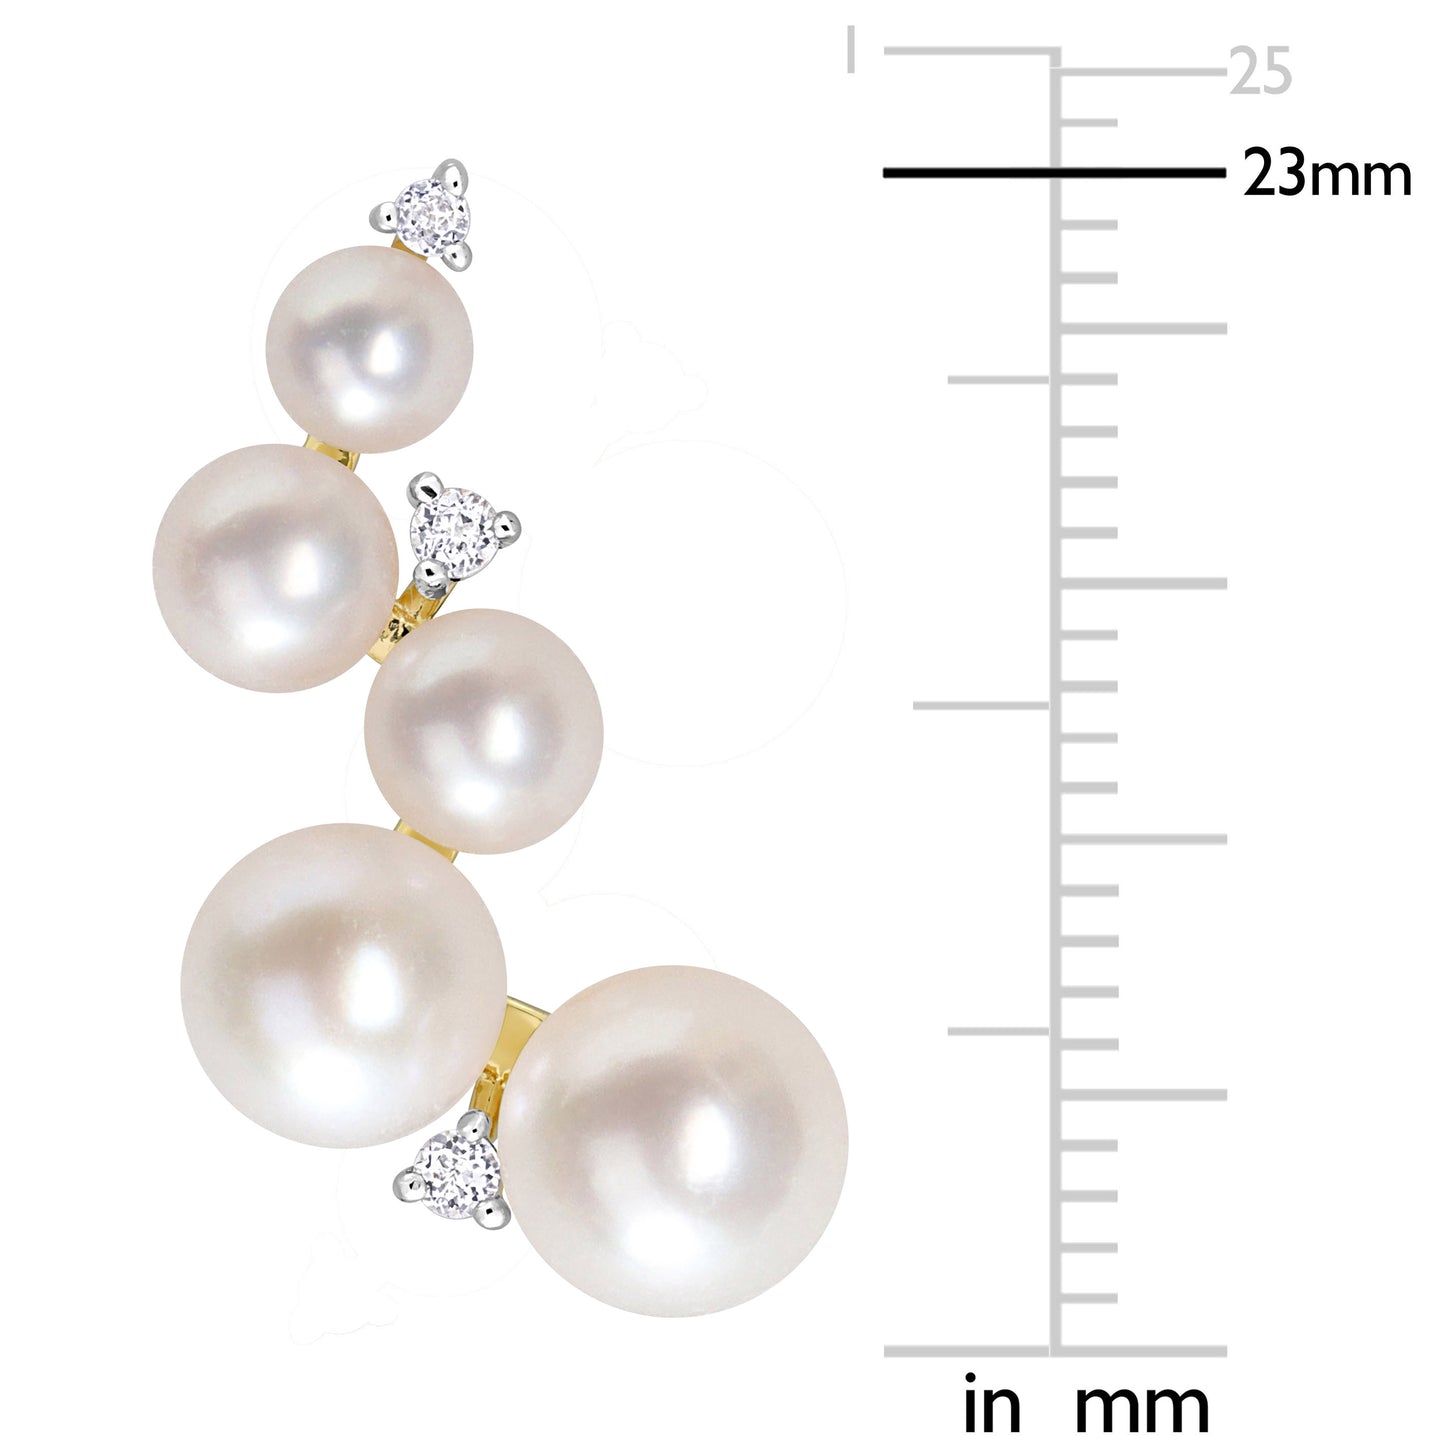 1/4 CT TGW White Topaz And White Freshwater Cultured Pearl Fashion Post Earrings Yellow Silver